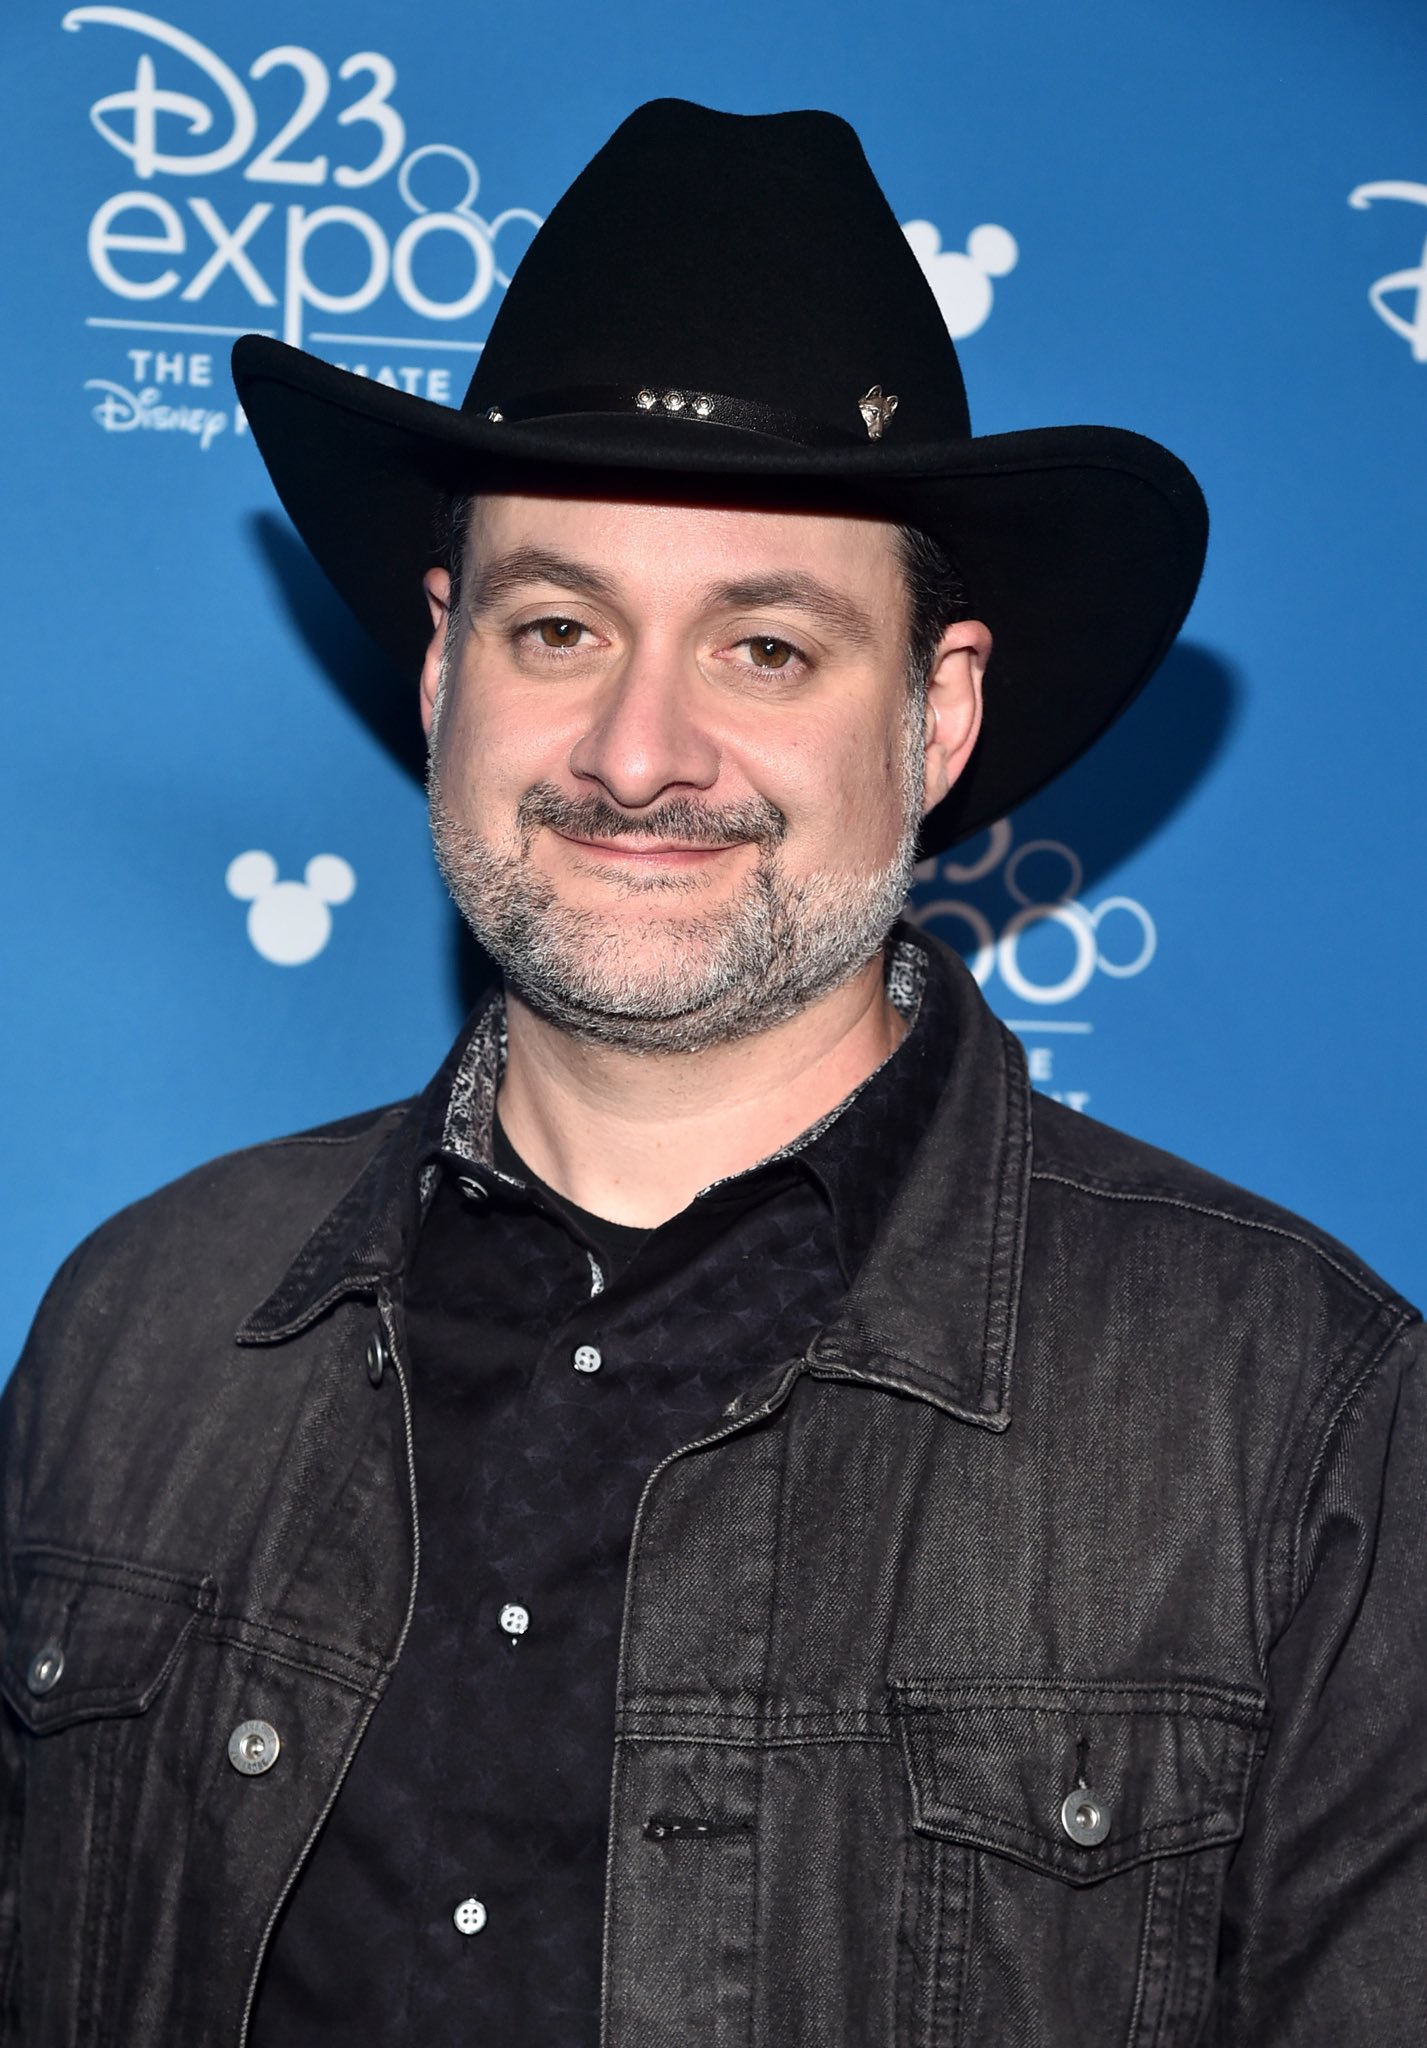 Happy birthday to a Dave Filoni for giving us Rebels and Clone wars and making me fall in love with them! 